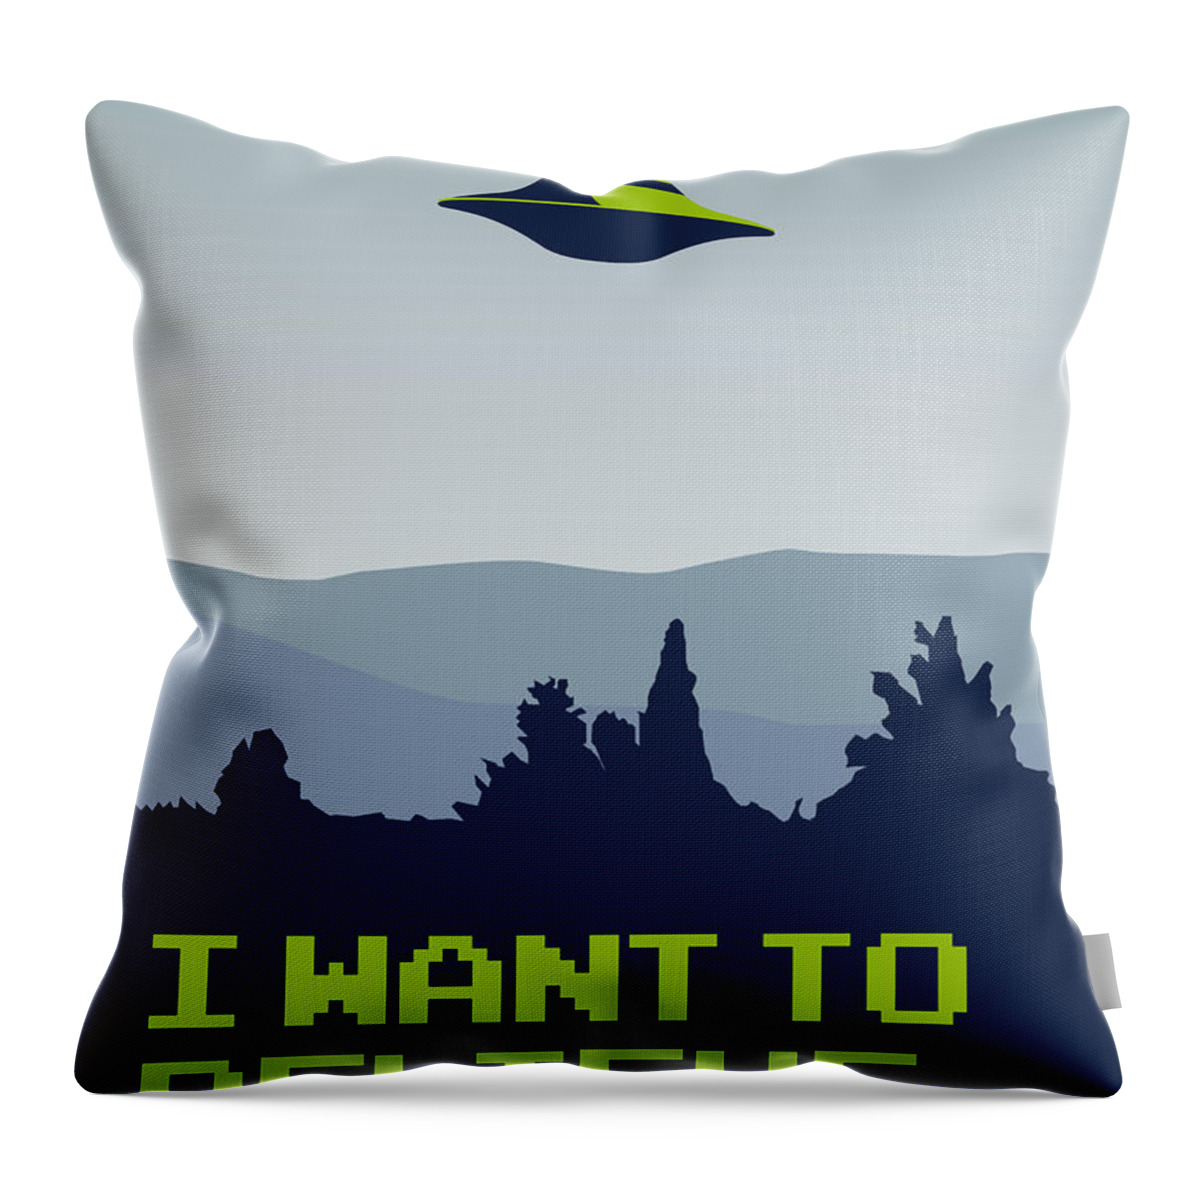 Classic Throw Pillow featuring the digital art My I want to believe minimal poster by Chungkong Art